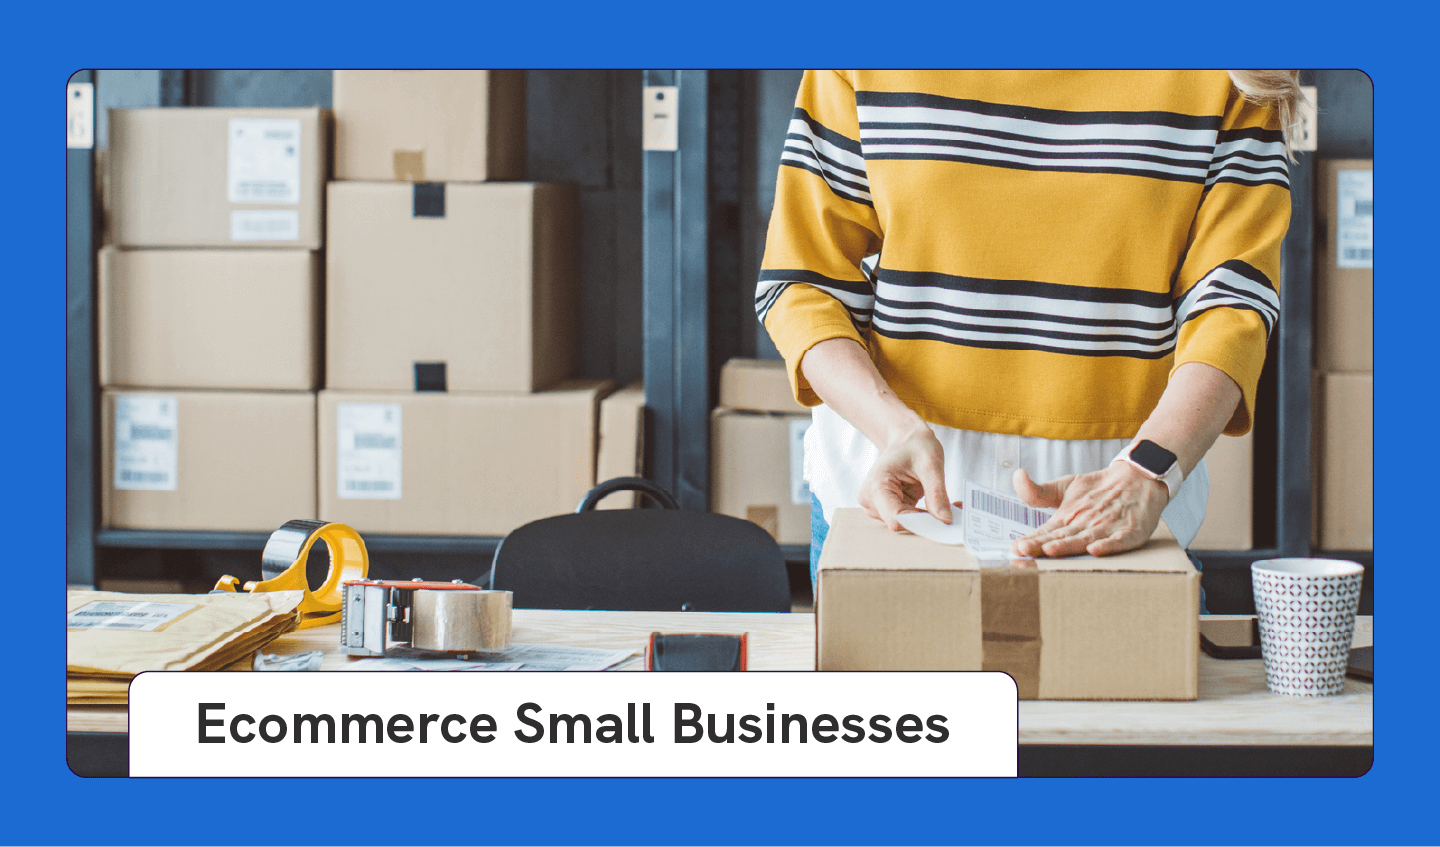 Photograph of a person packing an ecommerce order as an example of a small business idea with text that says “Ecommerce Small Businesses.